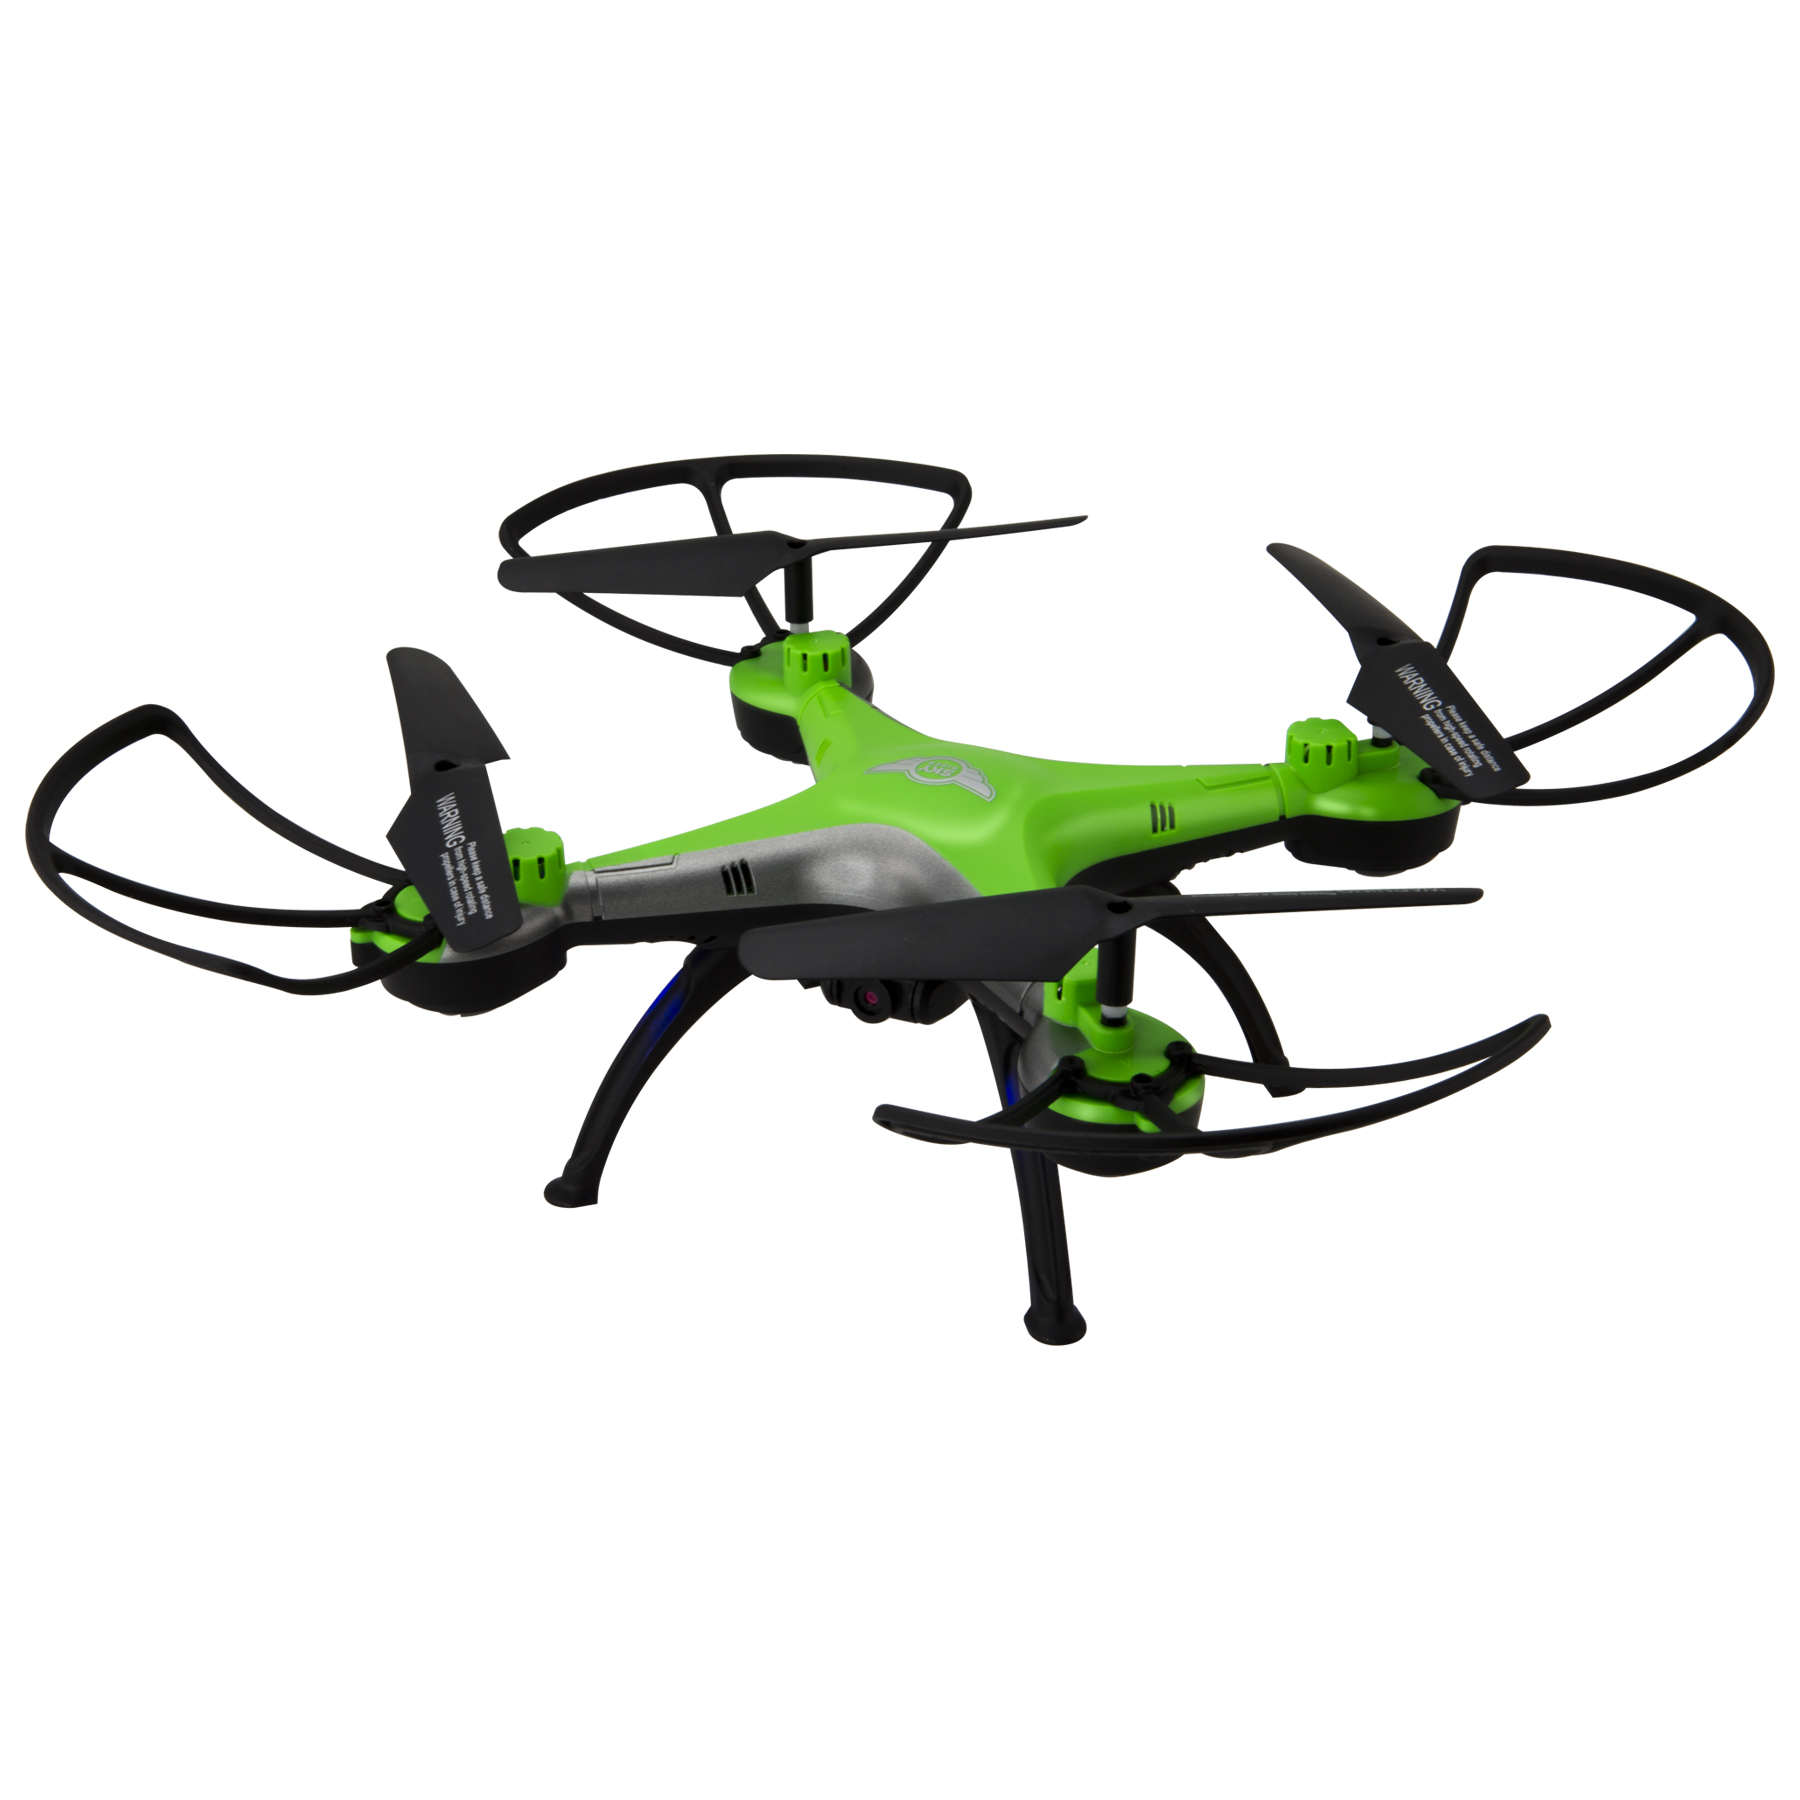 Sky Rider Thunderbird 2 Quadcopter Drone with Wi-Fi Camera, DRW330, Green - image 1 of 5